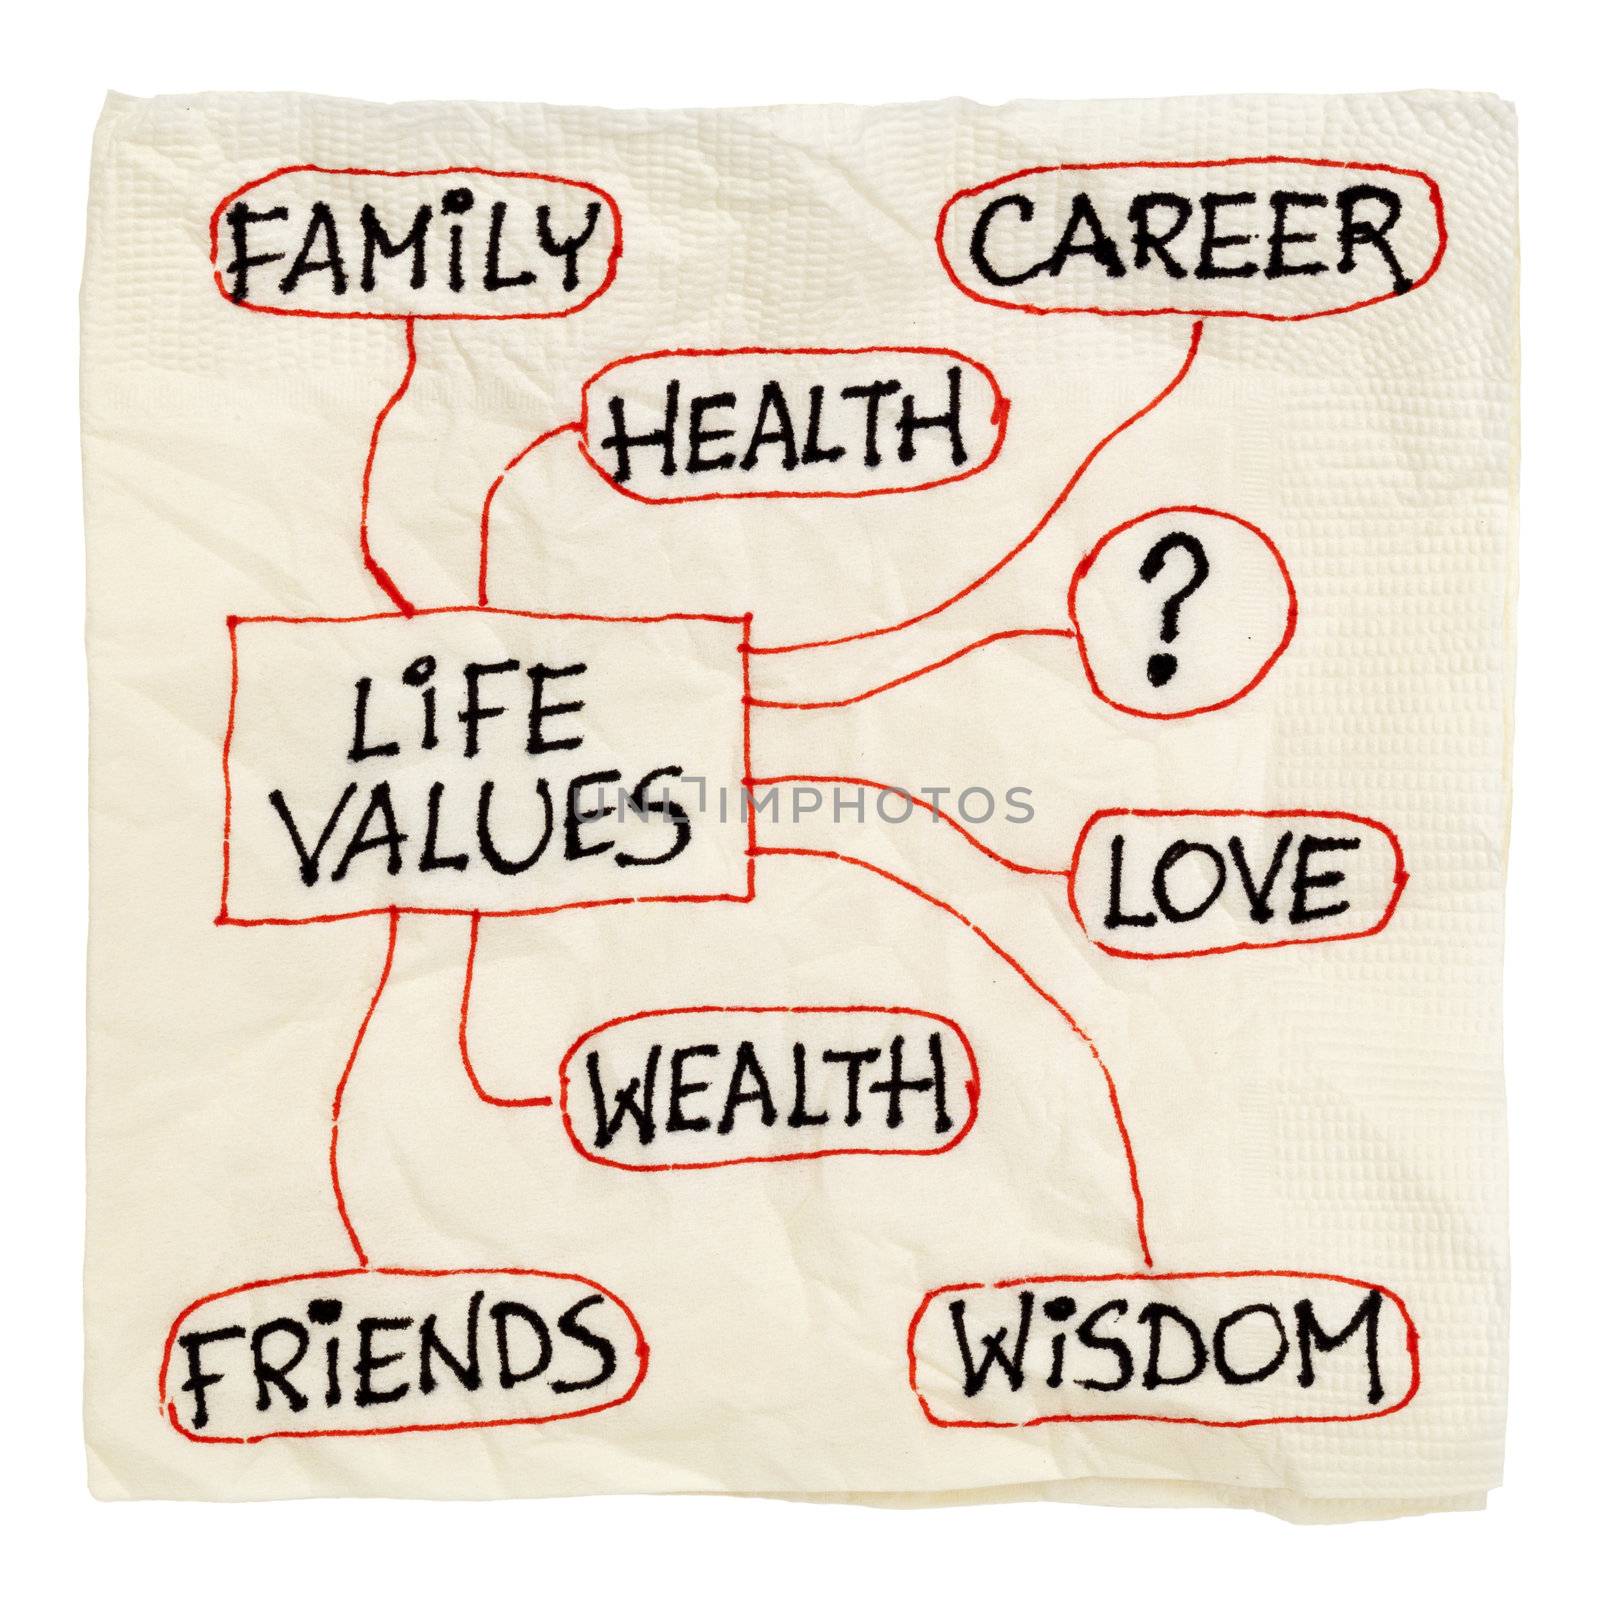 life value cncept on a napkin by PixelsAway